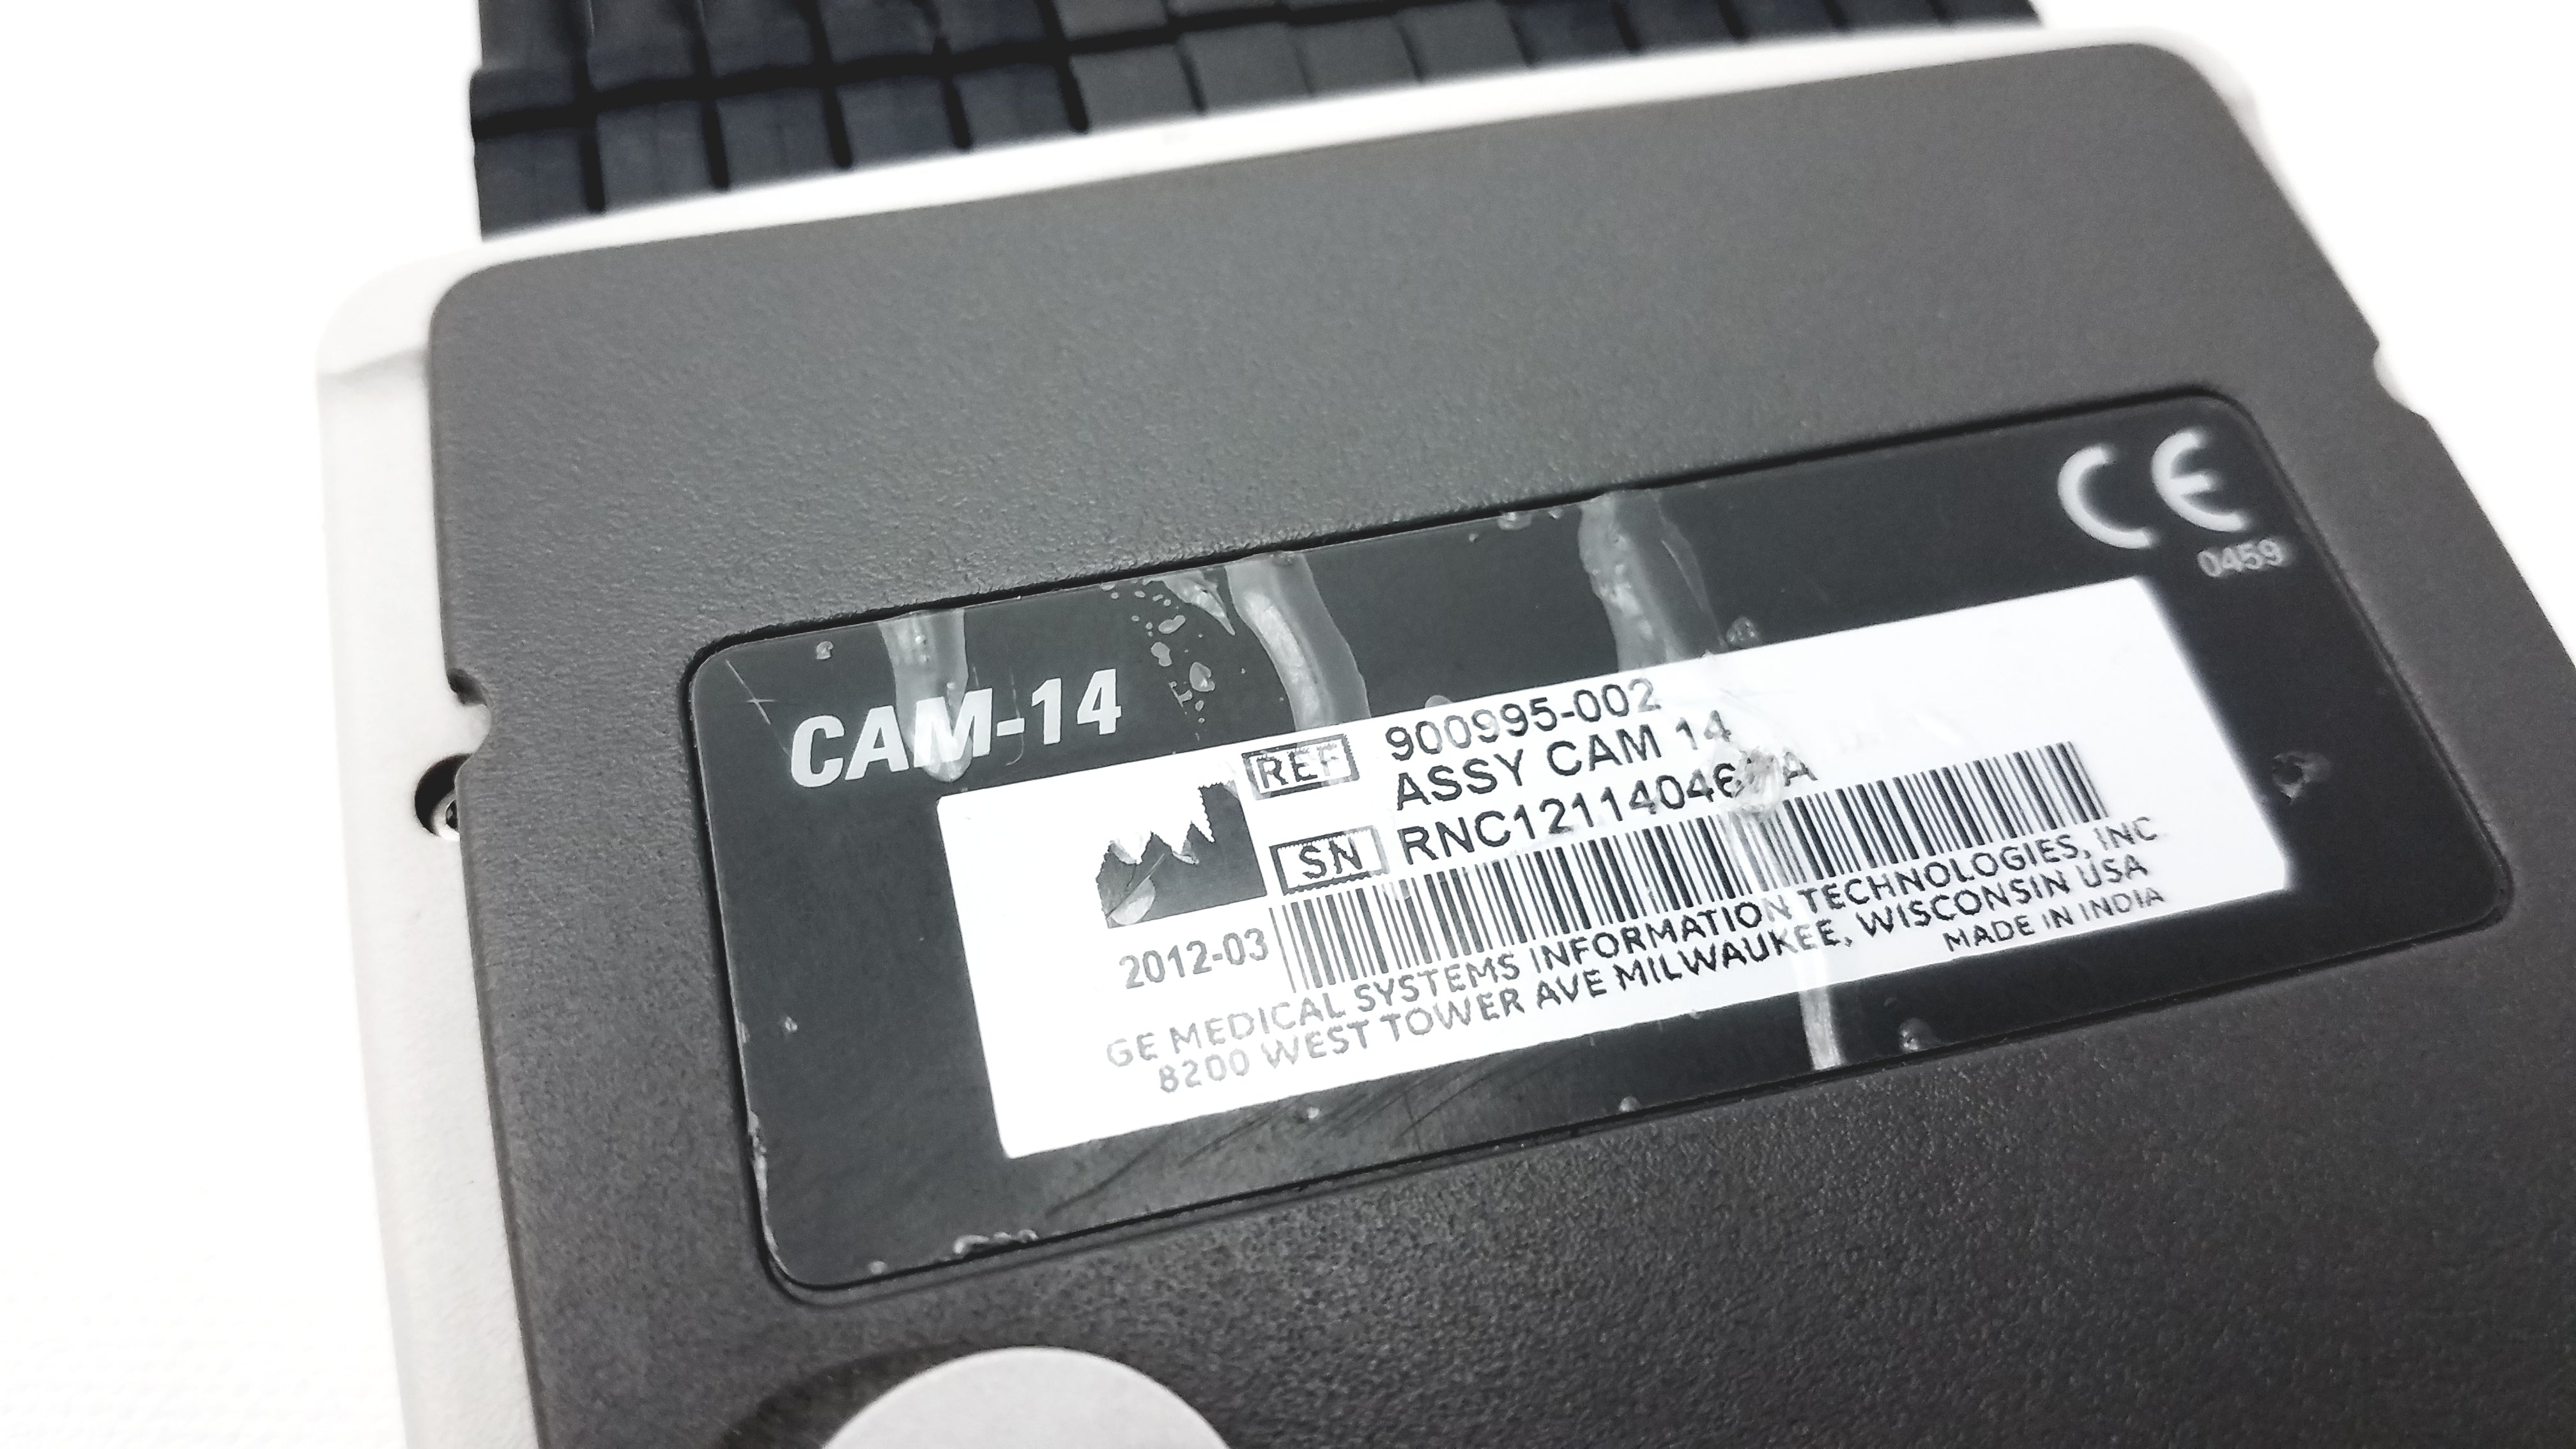 Load image into Gallery viewer, GE CAM 14 HD Acquisition 900995-003 Module CAM HD